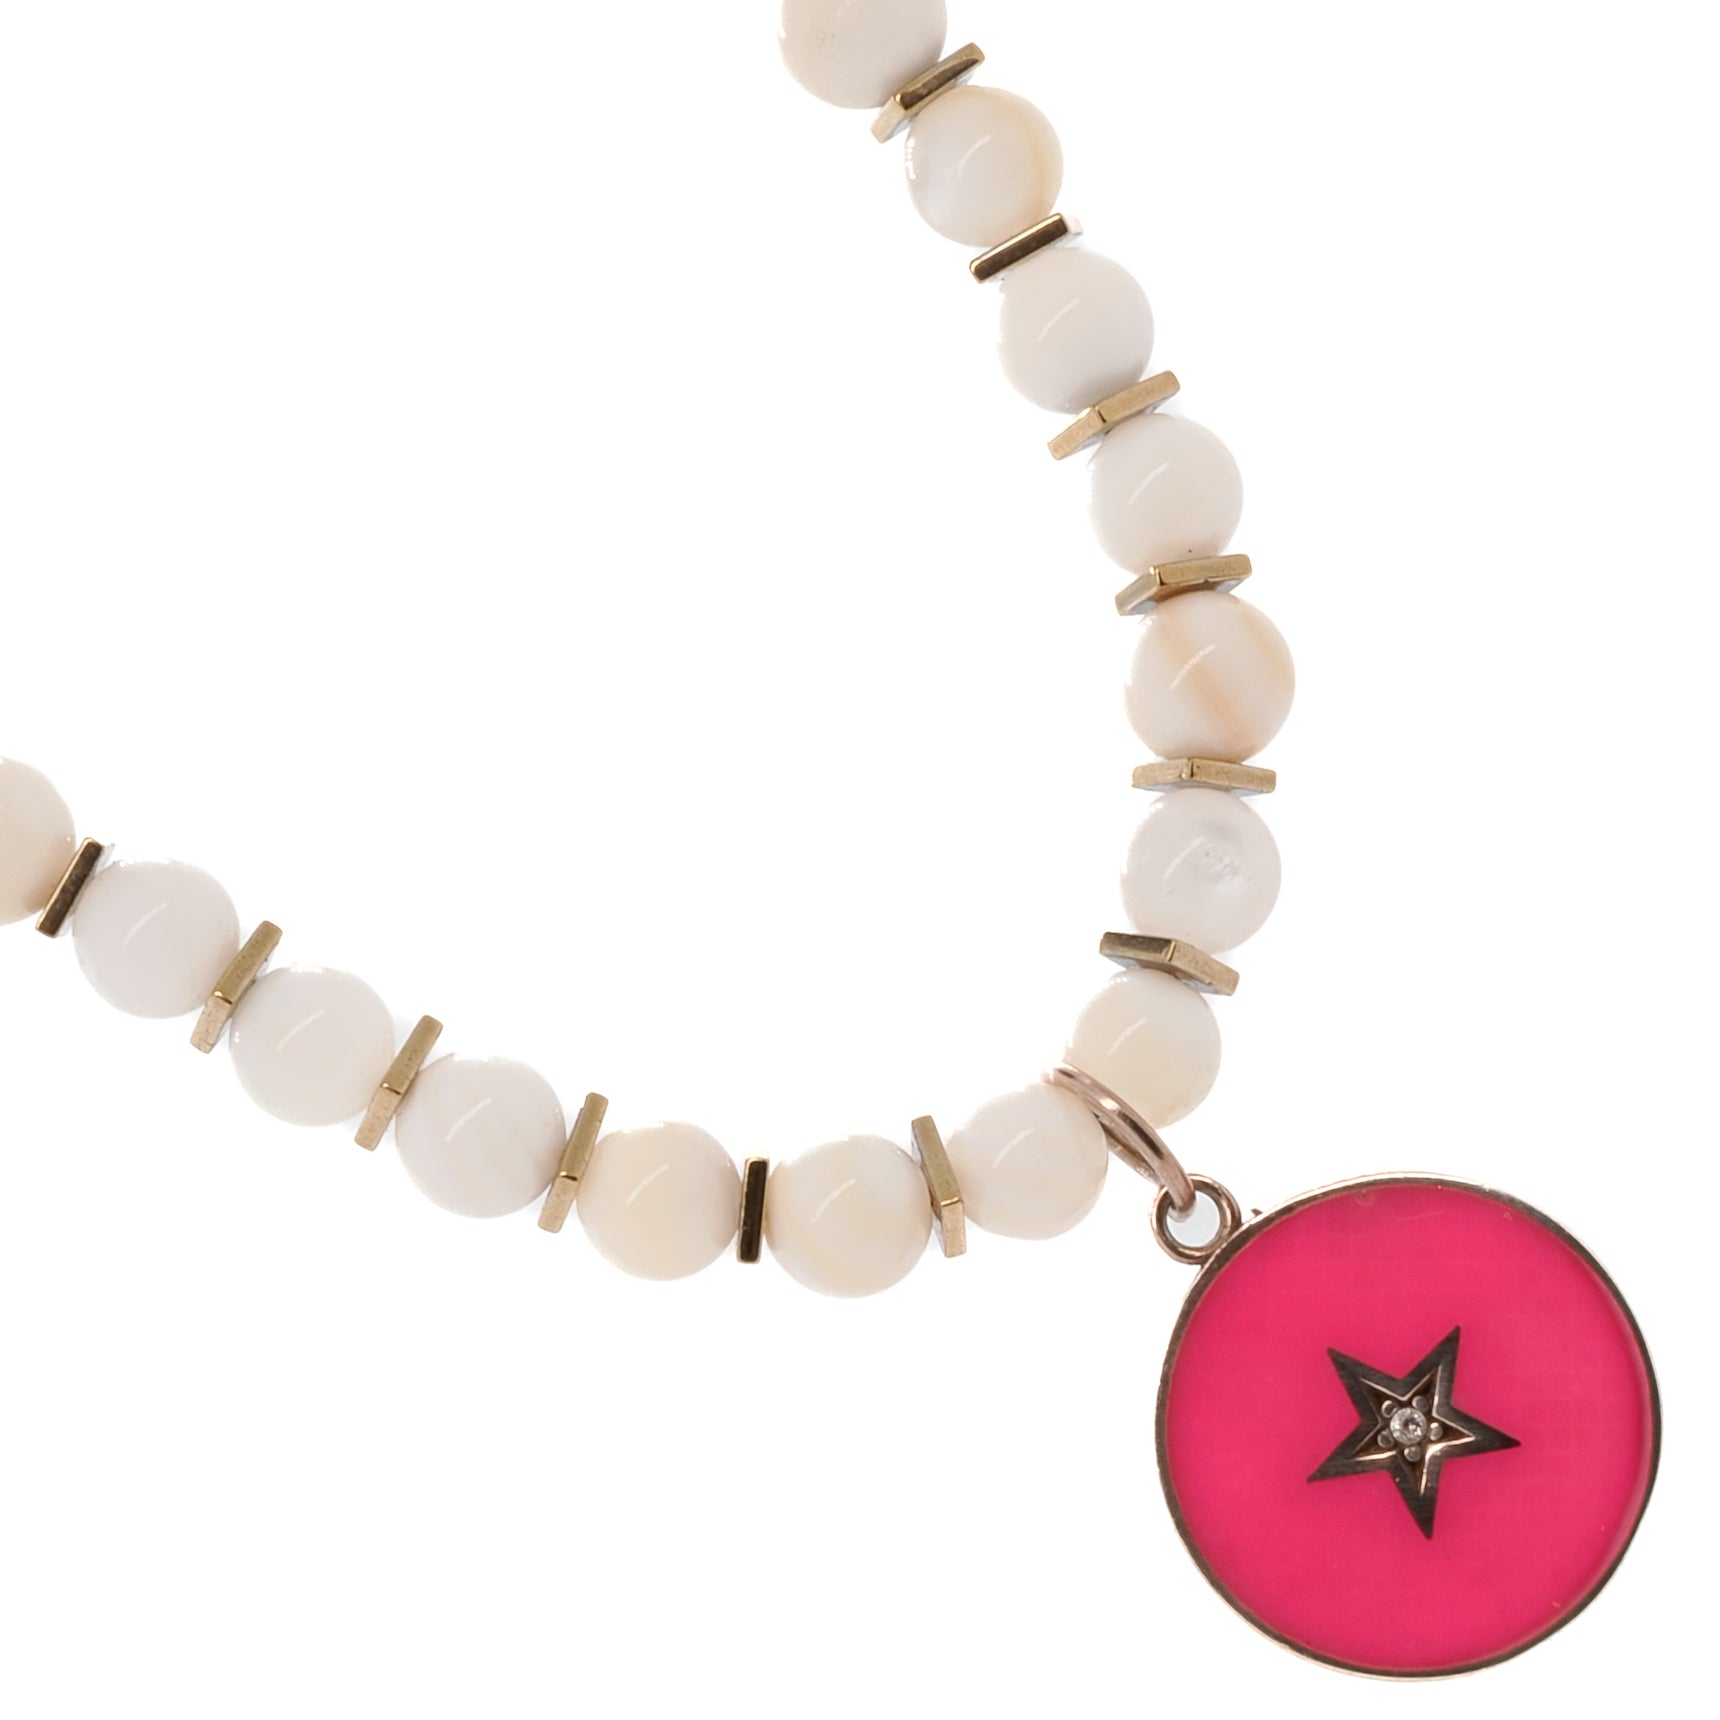 Embrace the positive energy of the Pink Star White Choker Necklace, crafted with tridacna stones for protection and good energy flow.